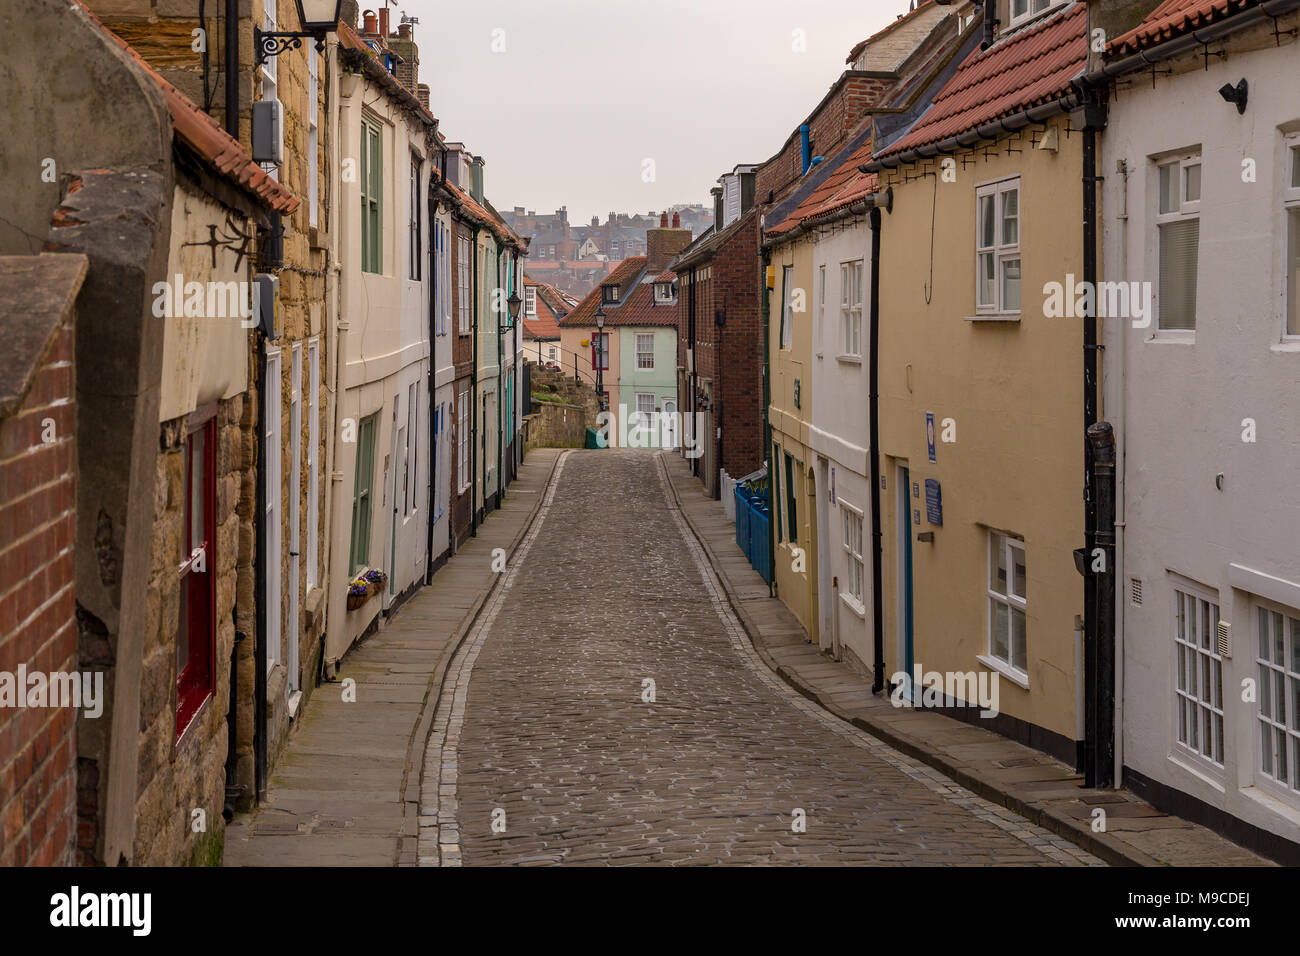 Whitby, North Yorkshire, England, UK - May 06, 2016: Narrow lane with houses Stock Photo